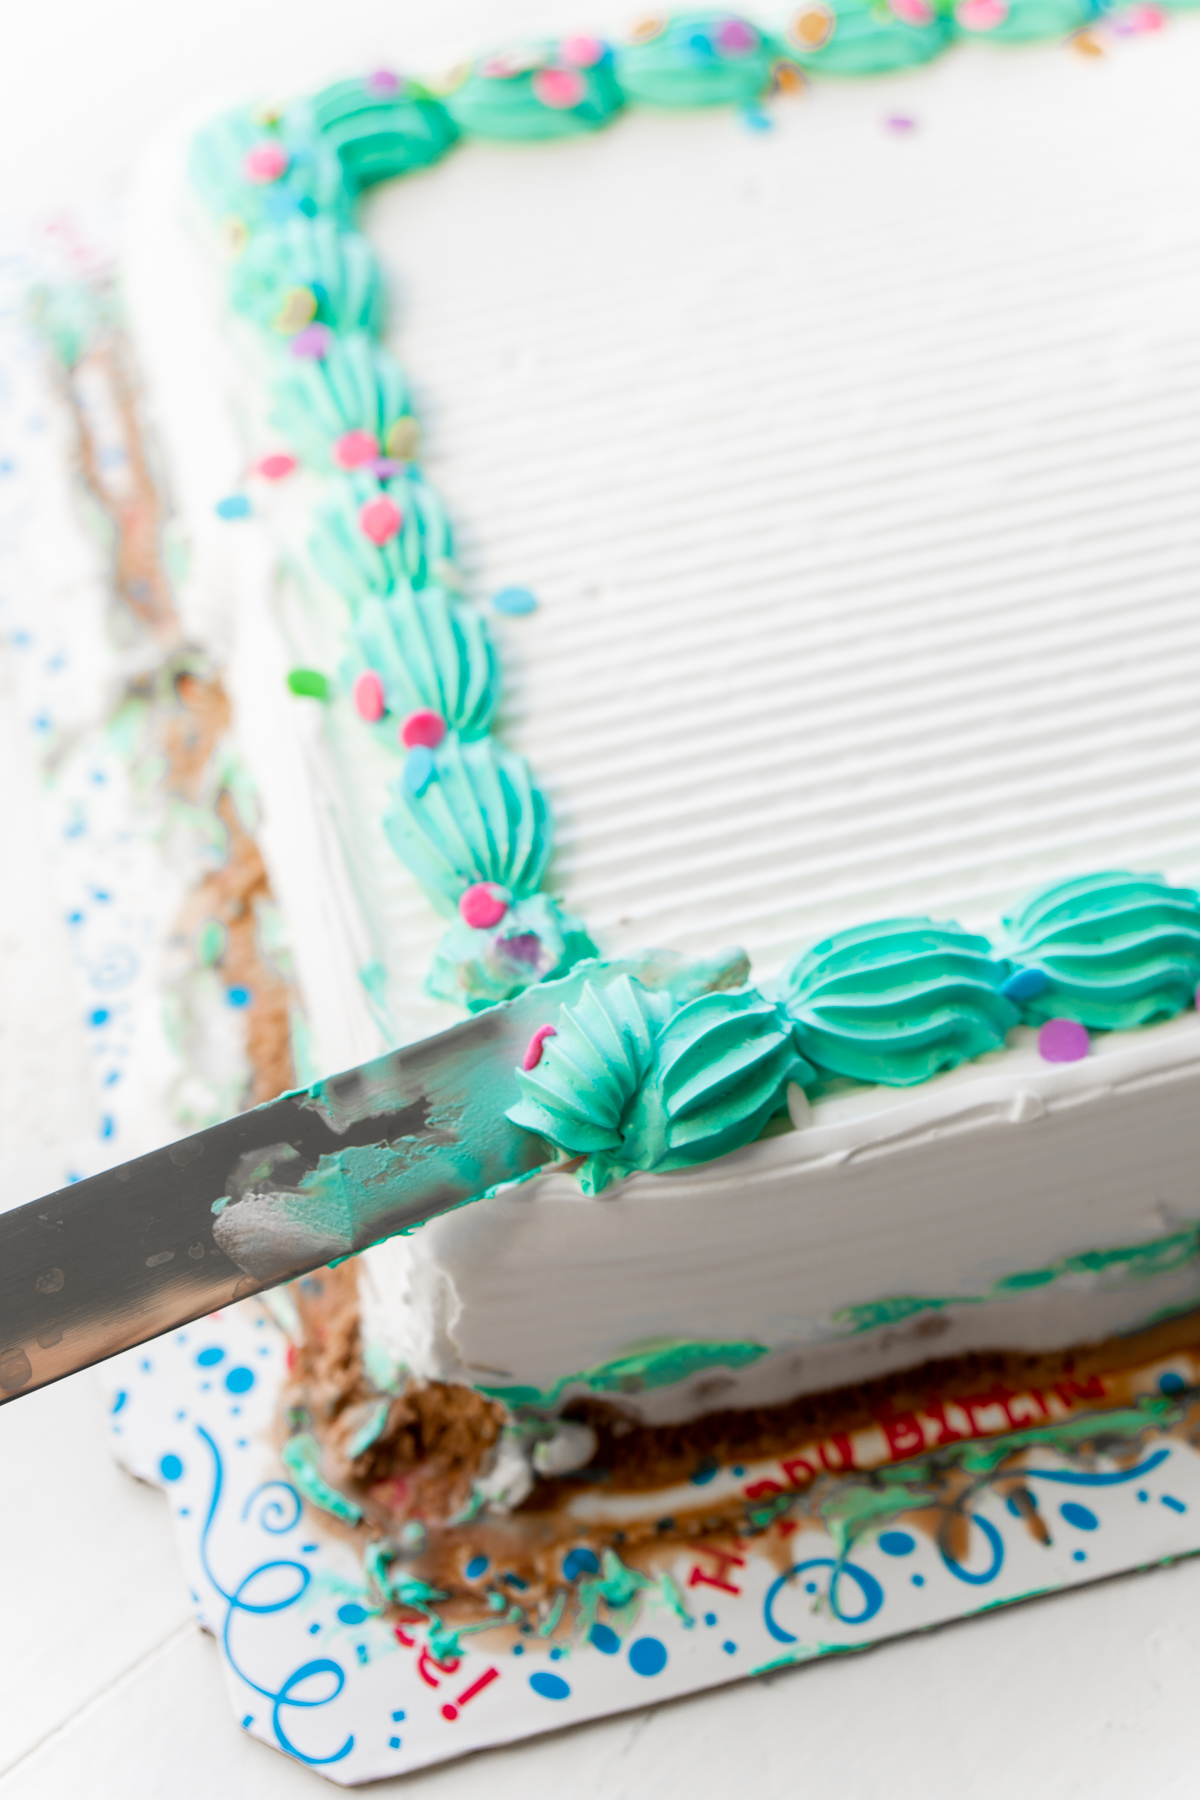 knife removing blue frosting from an ice cream cake